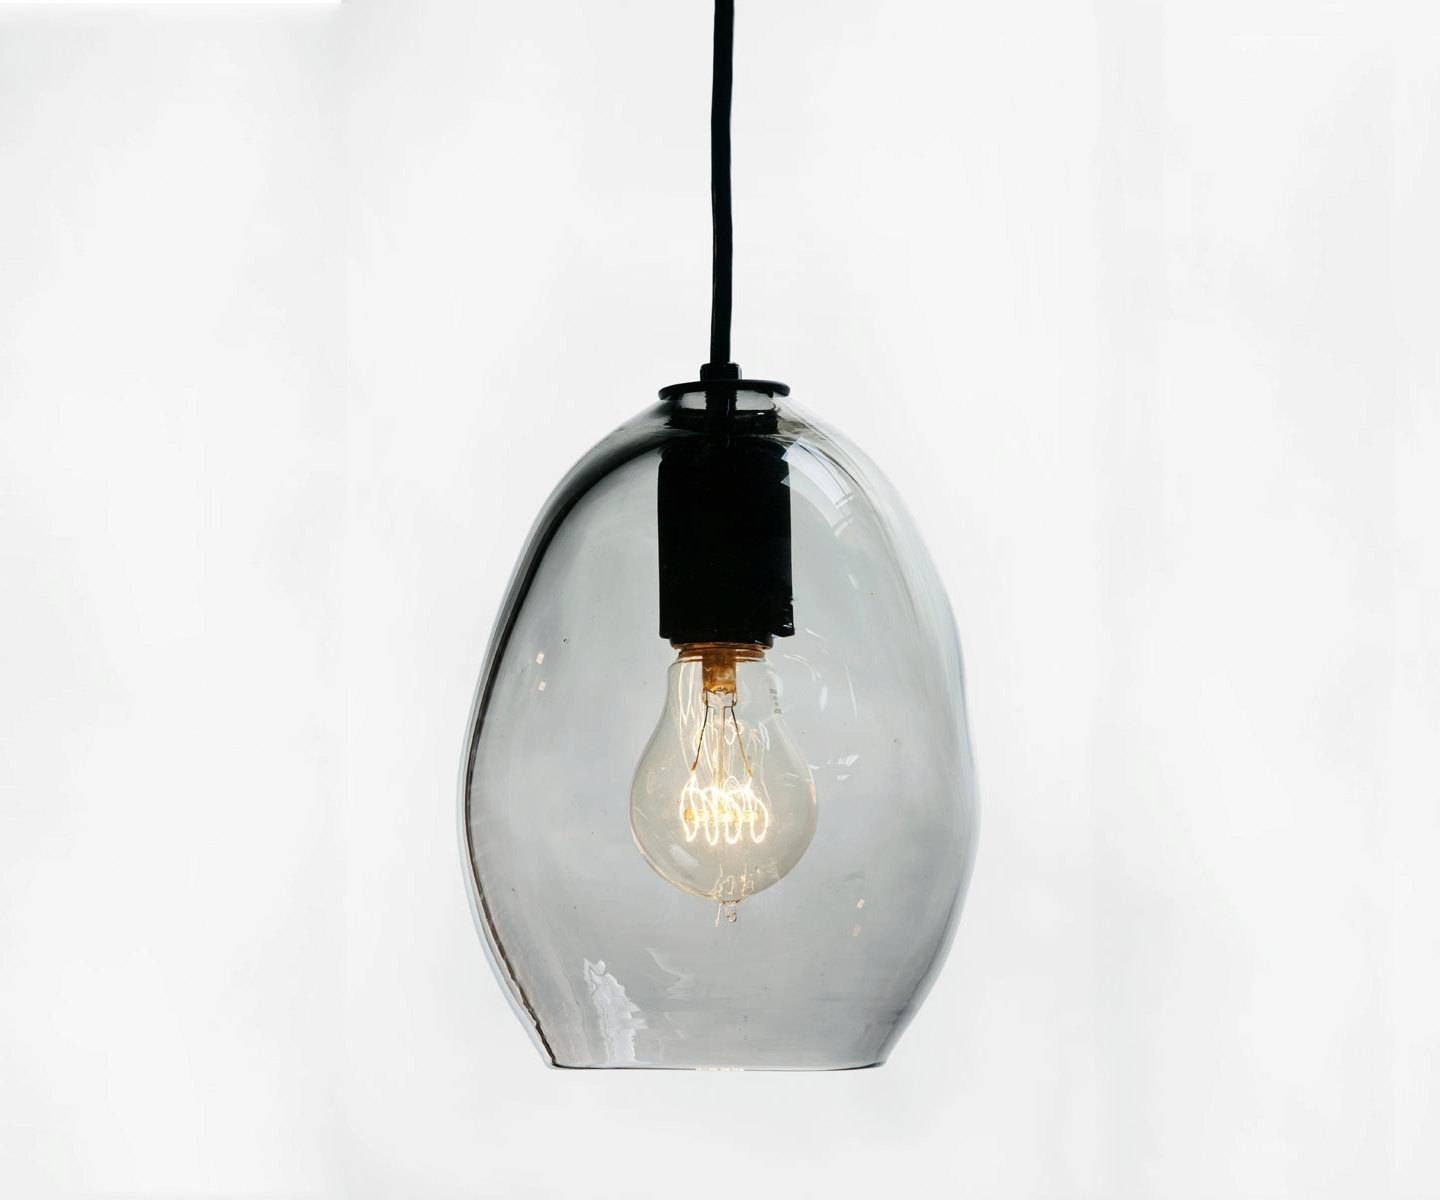 Blown Glass Pendant Lights | Home Lighting Insight In Hand Blown Glass Pendants (View 13 of 15)